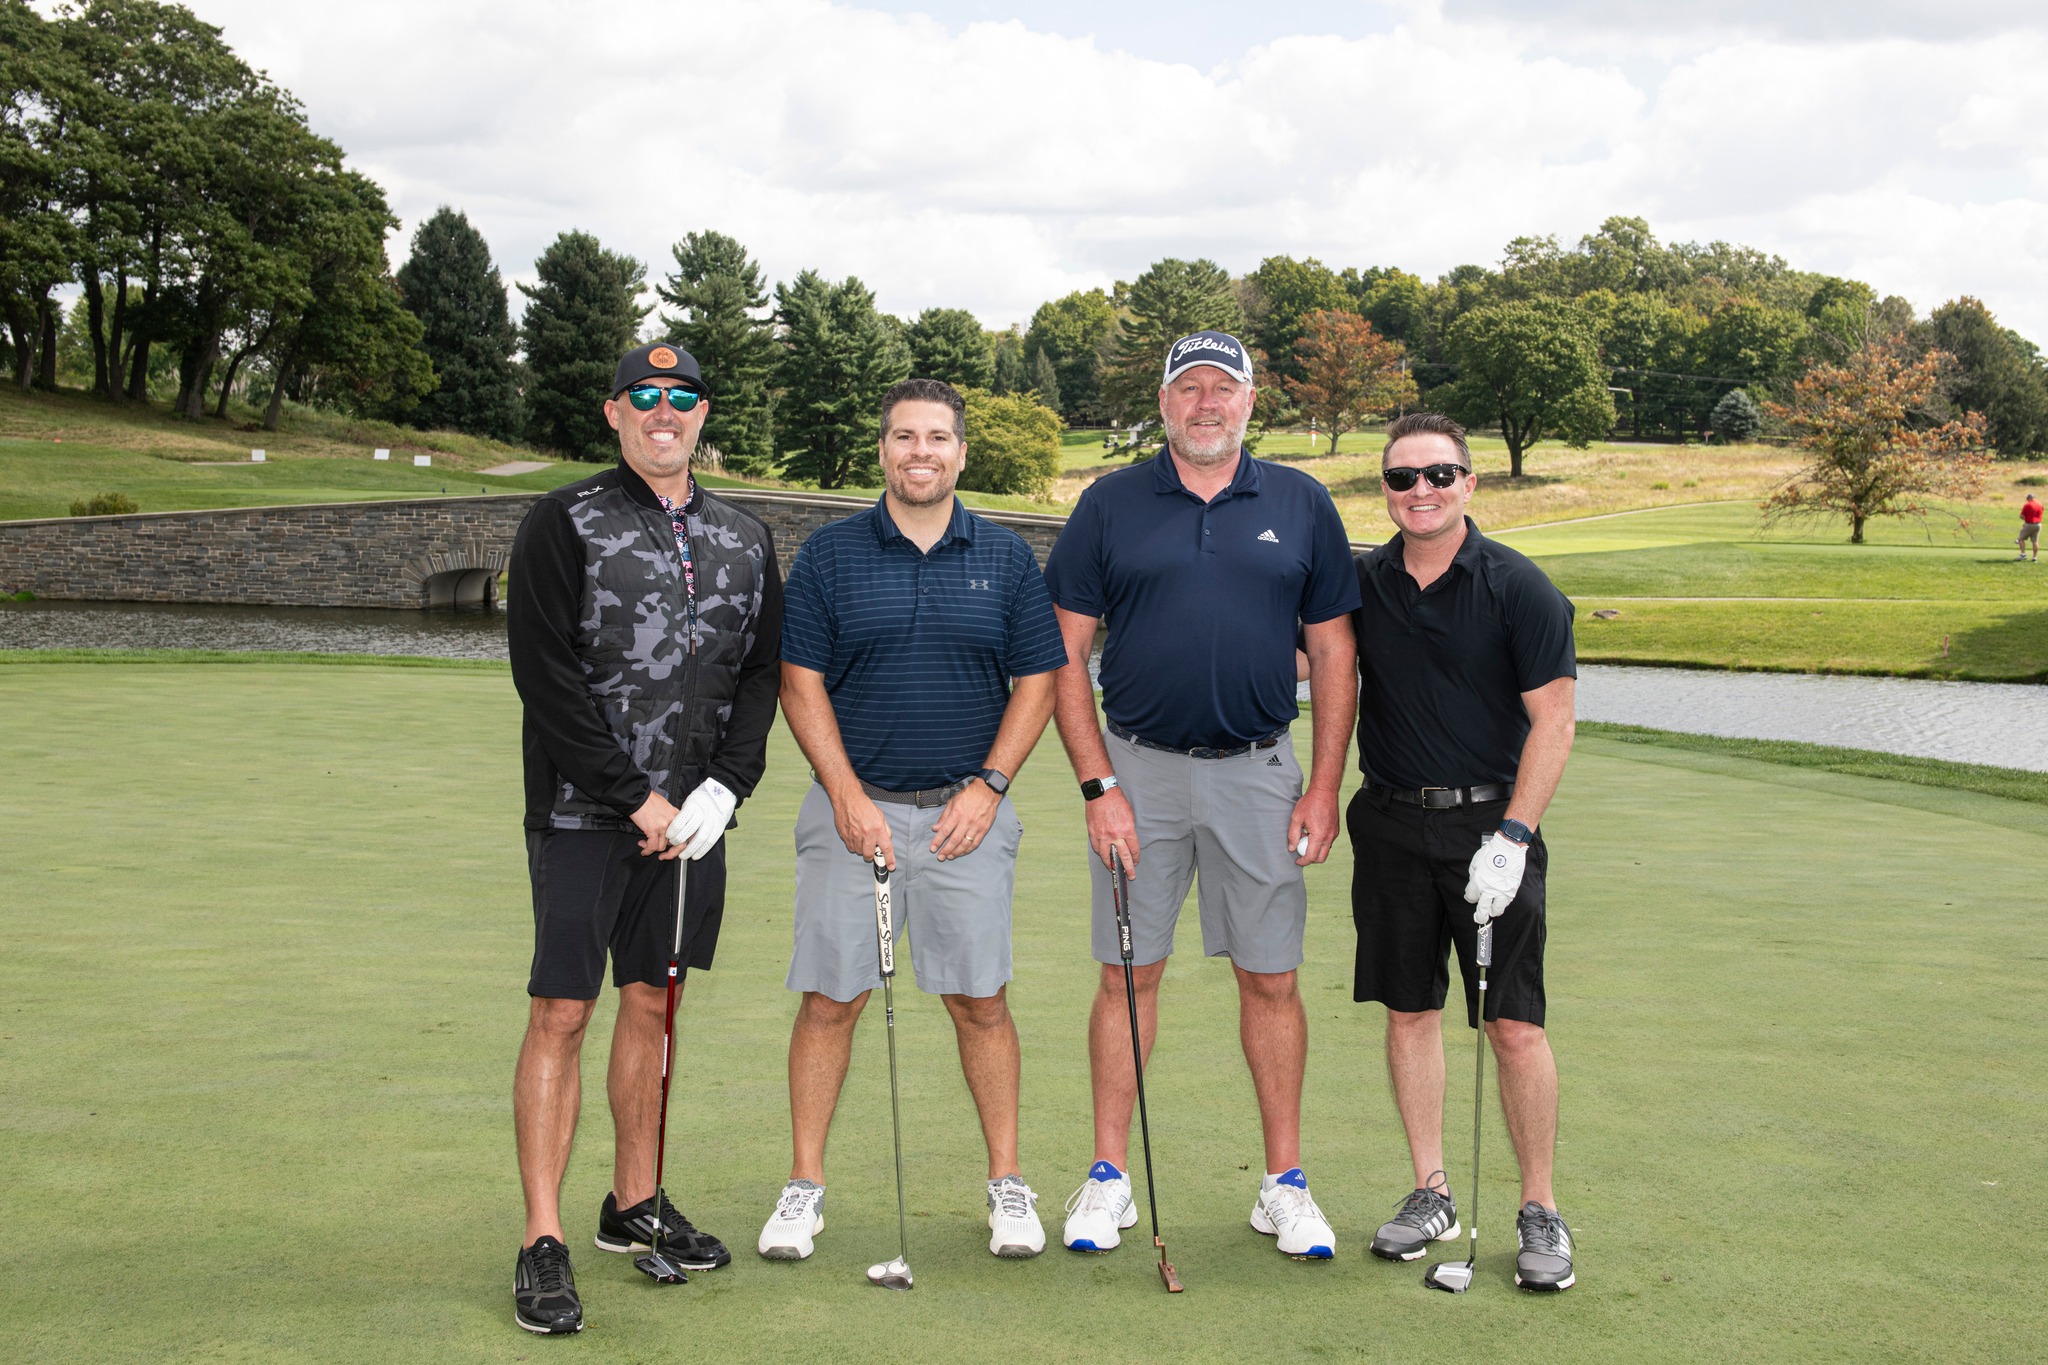 Four golfers on the golf course at arcola country club